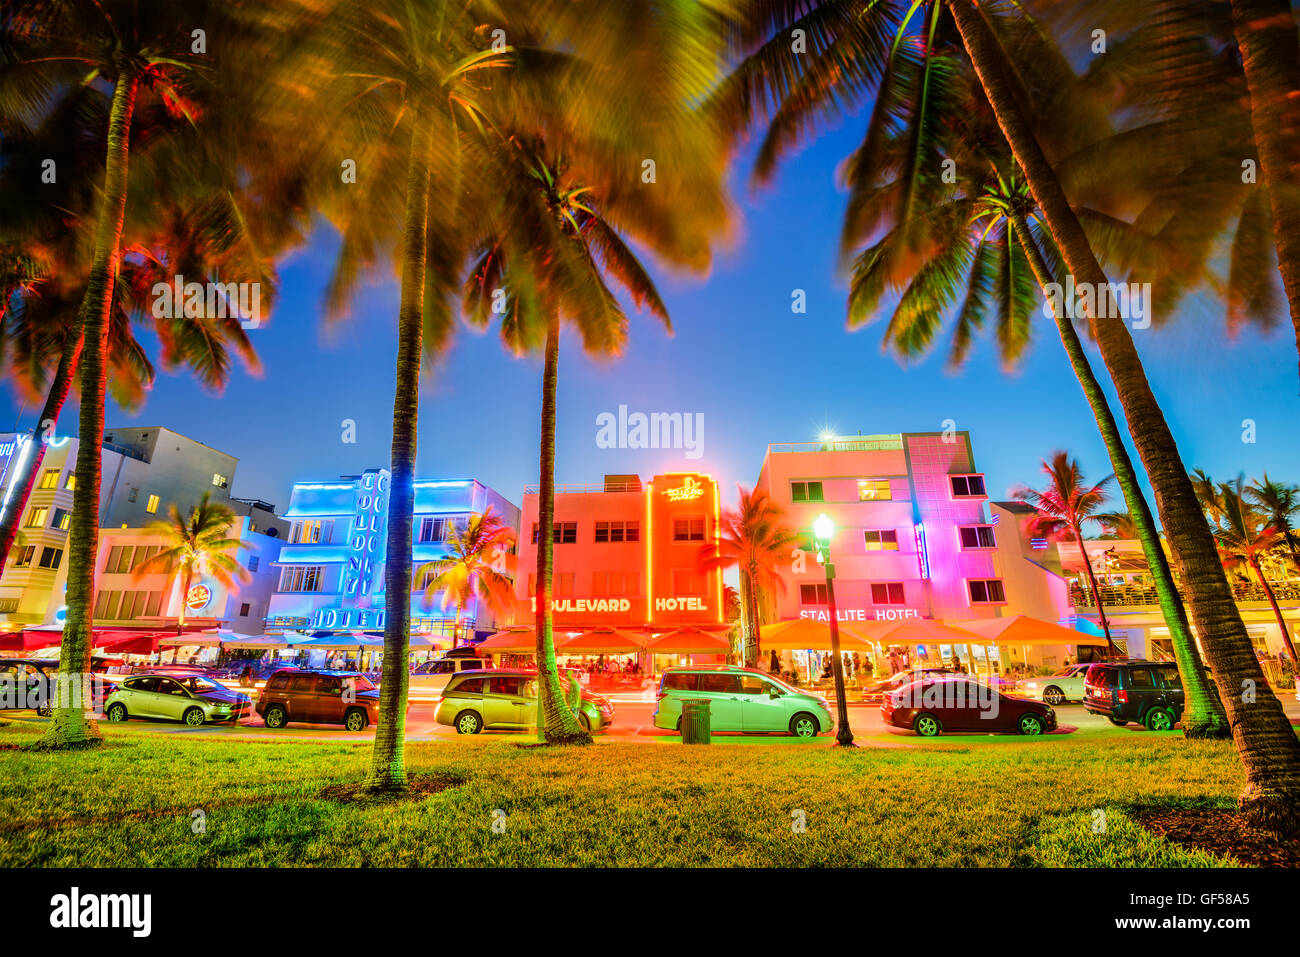 MIAMI, FLORIDA - JULY 5, 2016: Palm trees line Ocean Drive. The road is the main thoroughfare through South Beach. Stock Photo